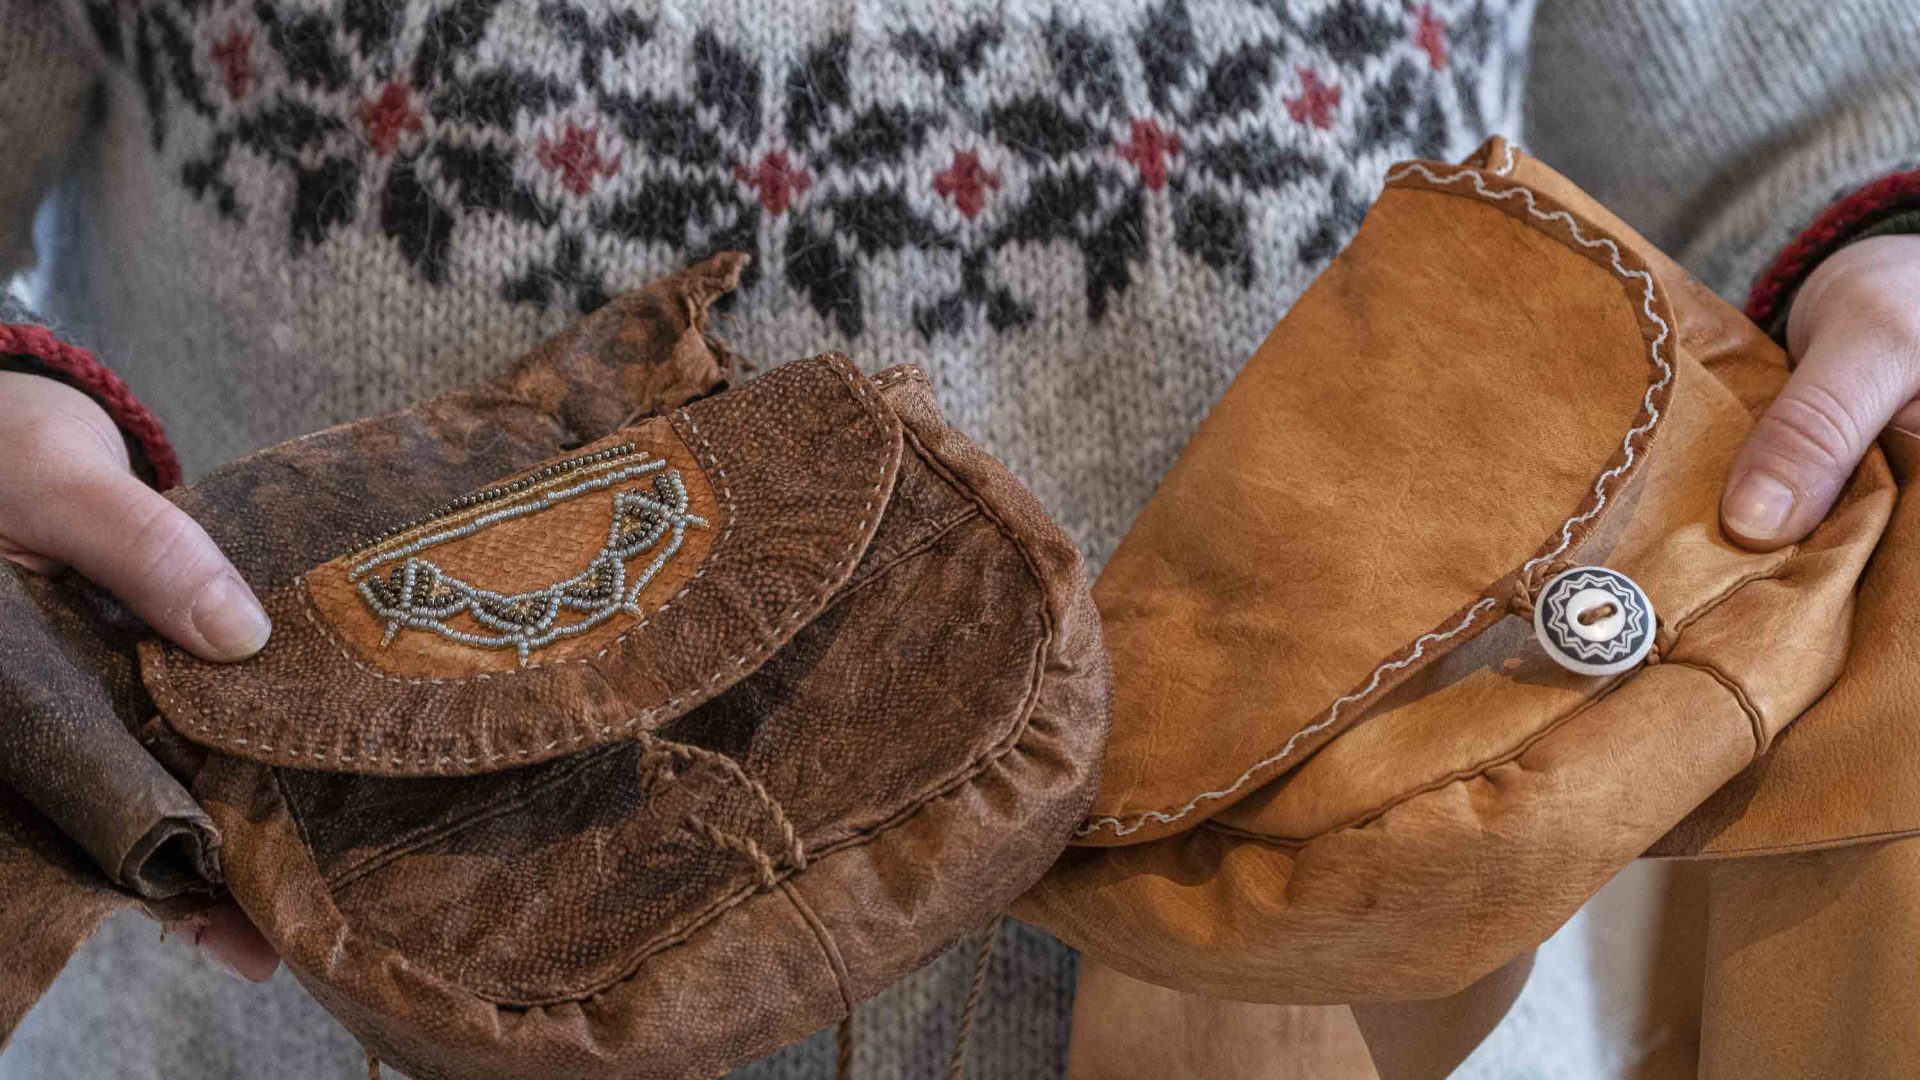 Hands holding two traditional Sápmi bags made from reindeer leather.